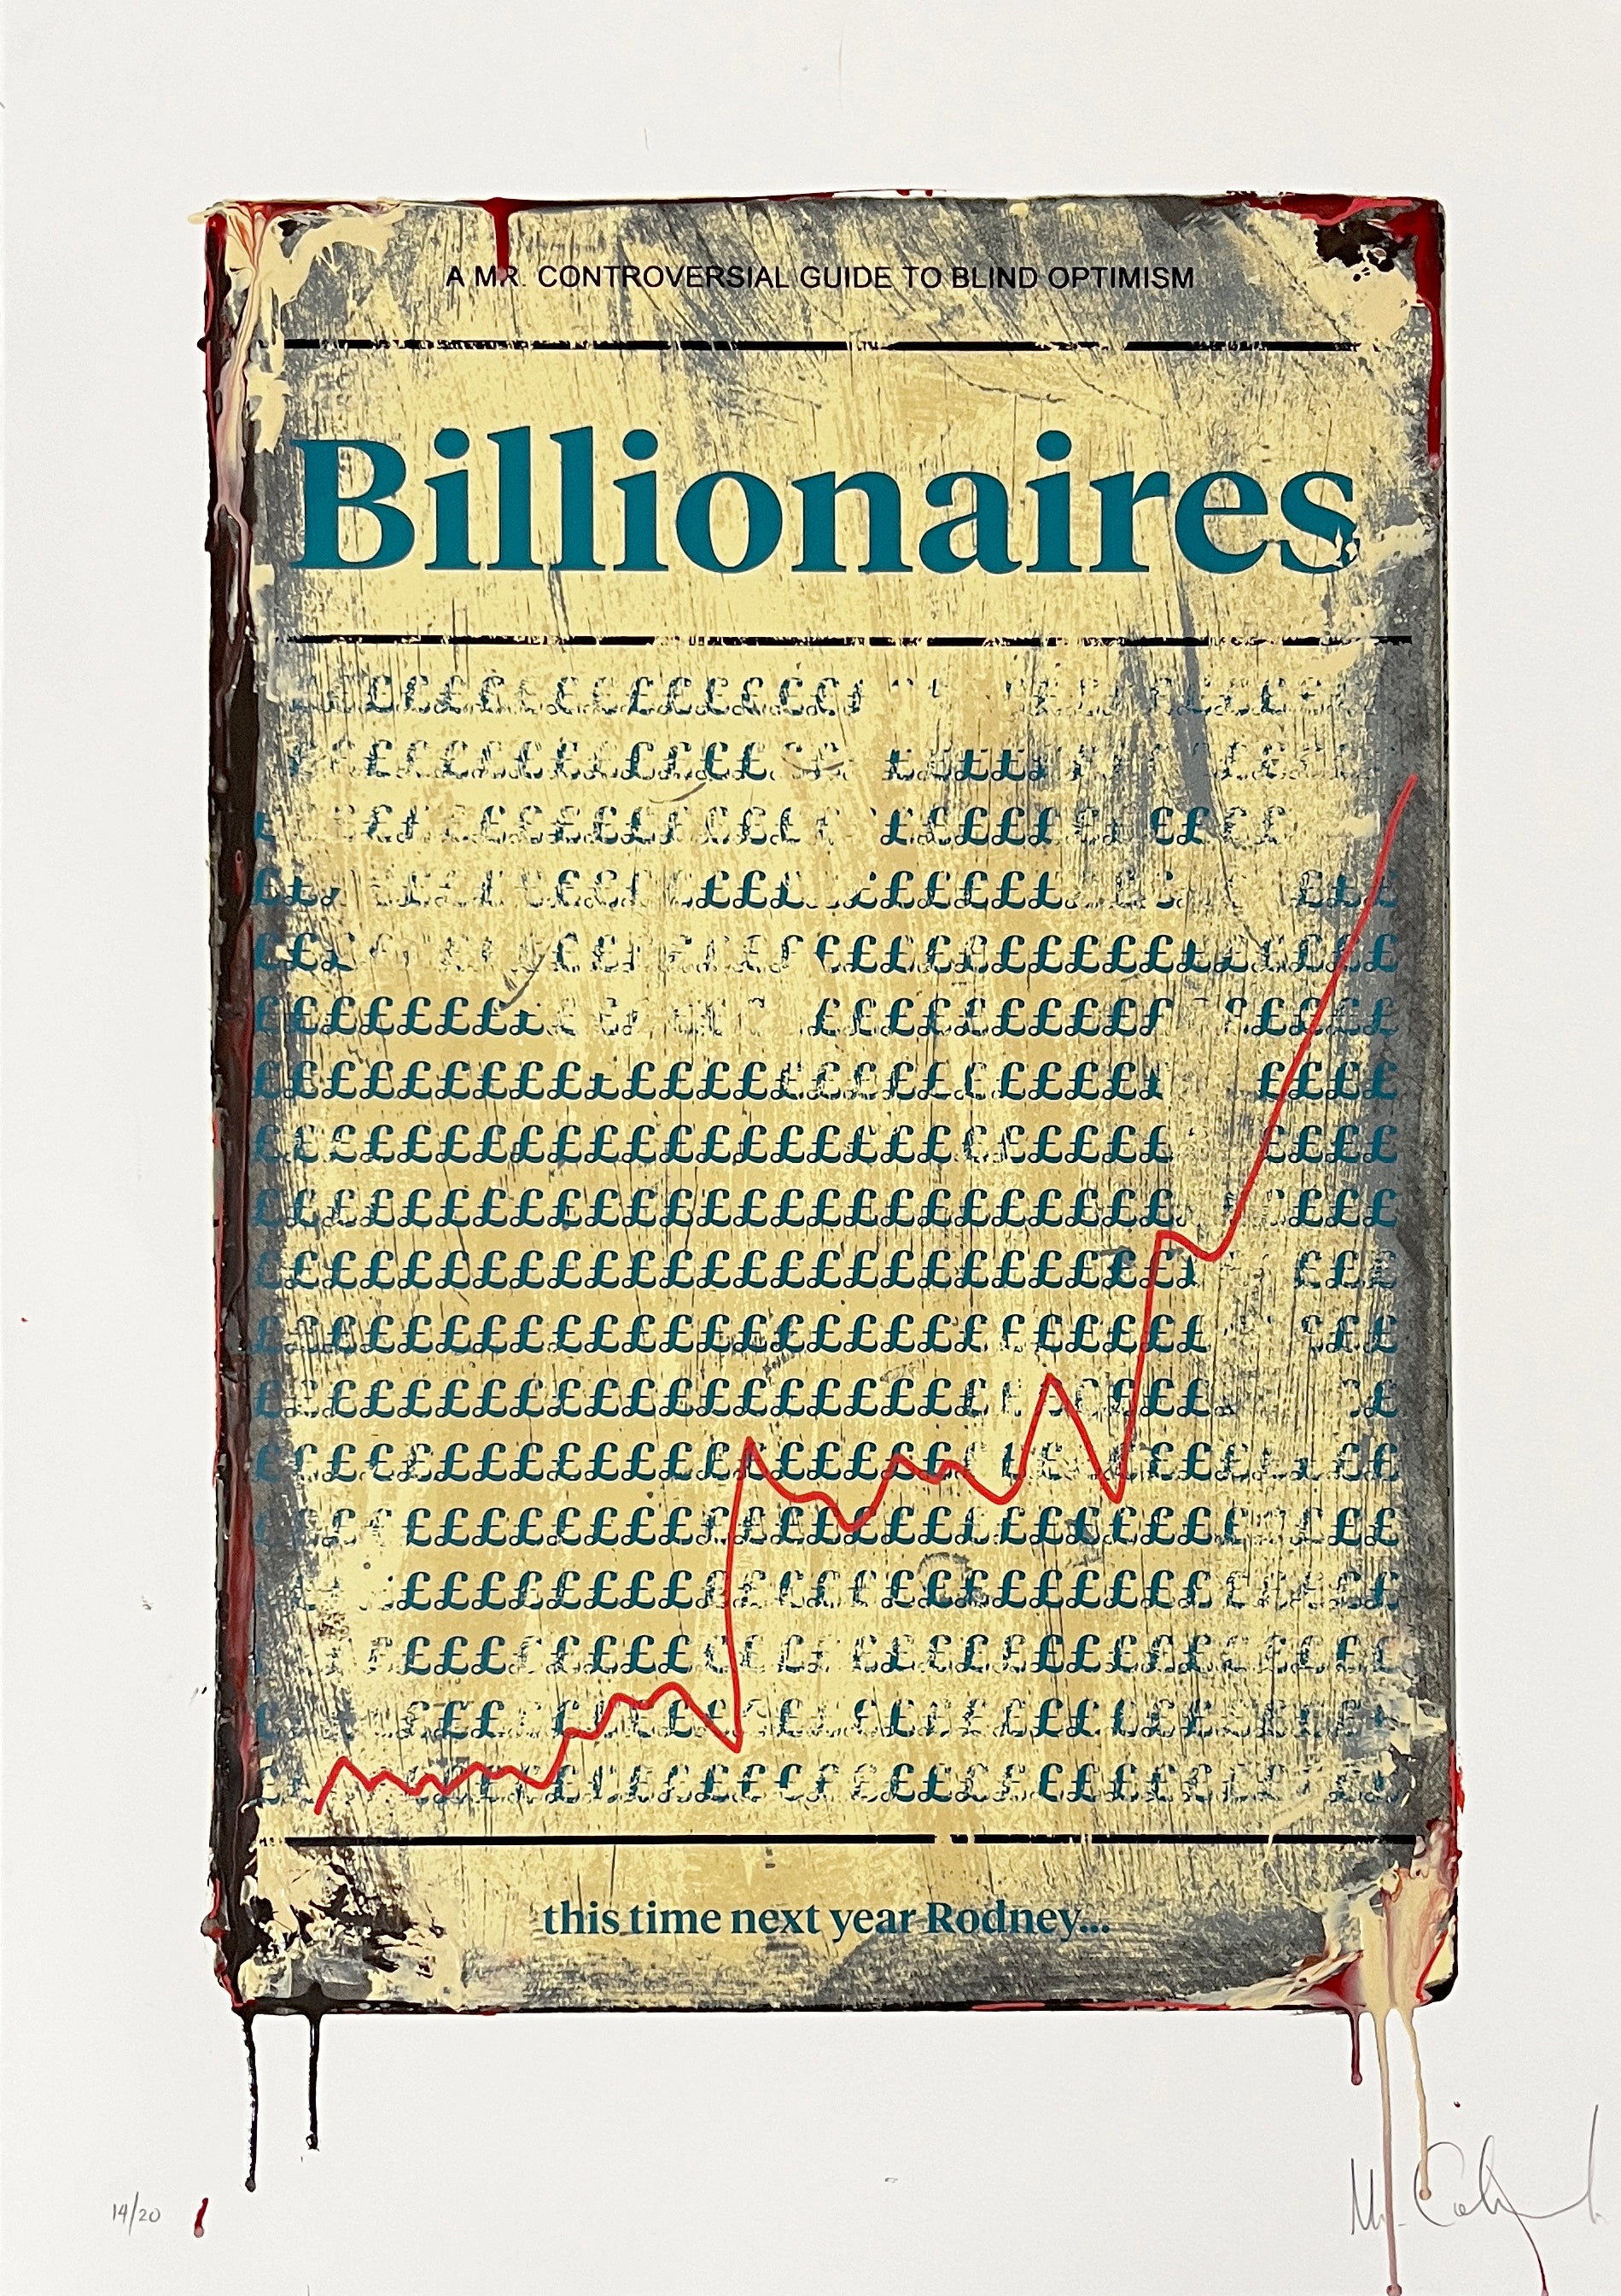 Mr Controversial, Artist, Billionaires, Edition 14, Hand-finished limited edition, TAP Galleries, Essex Chelmsford Art Gallery